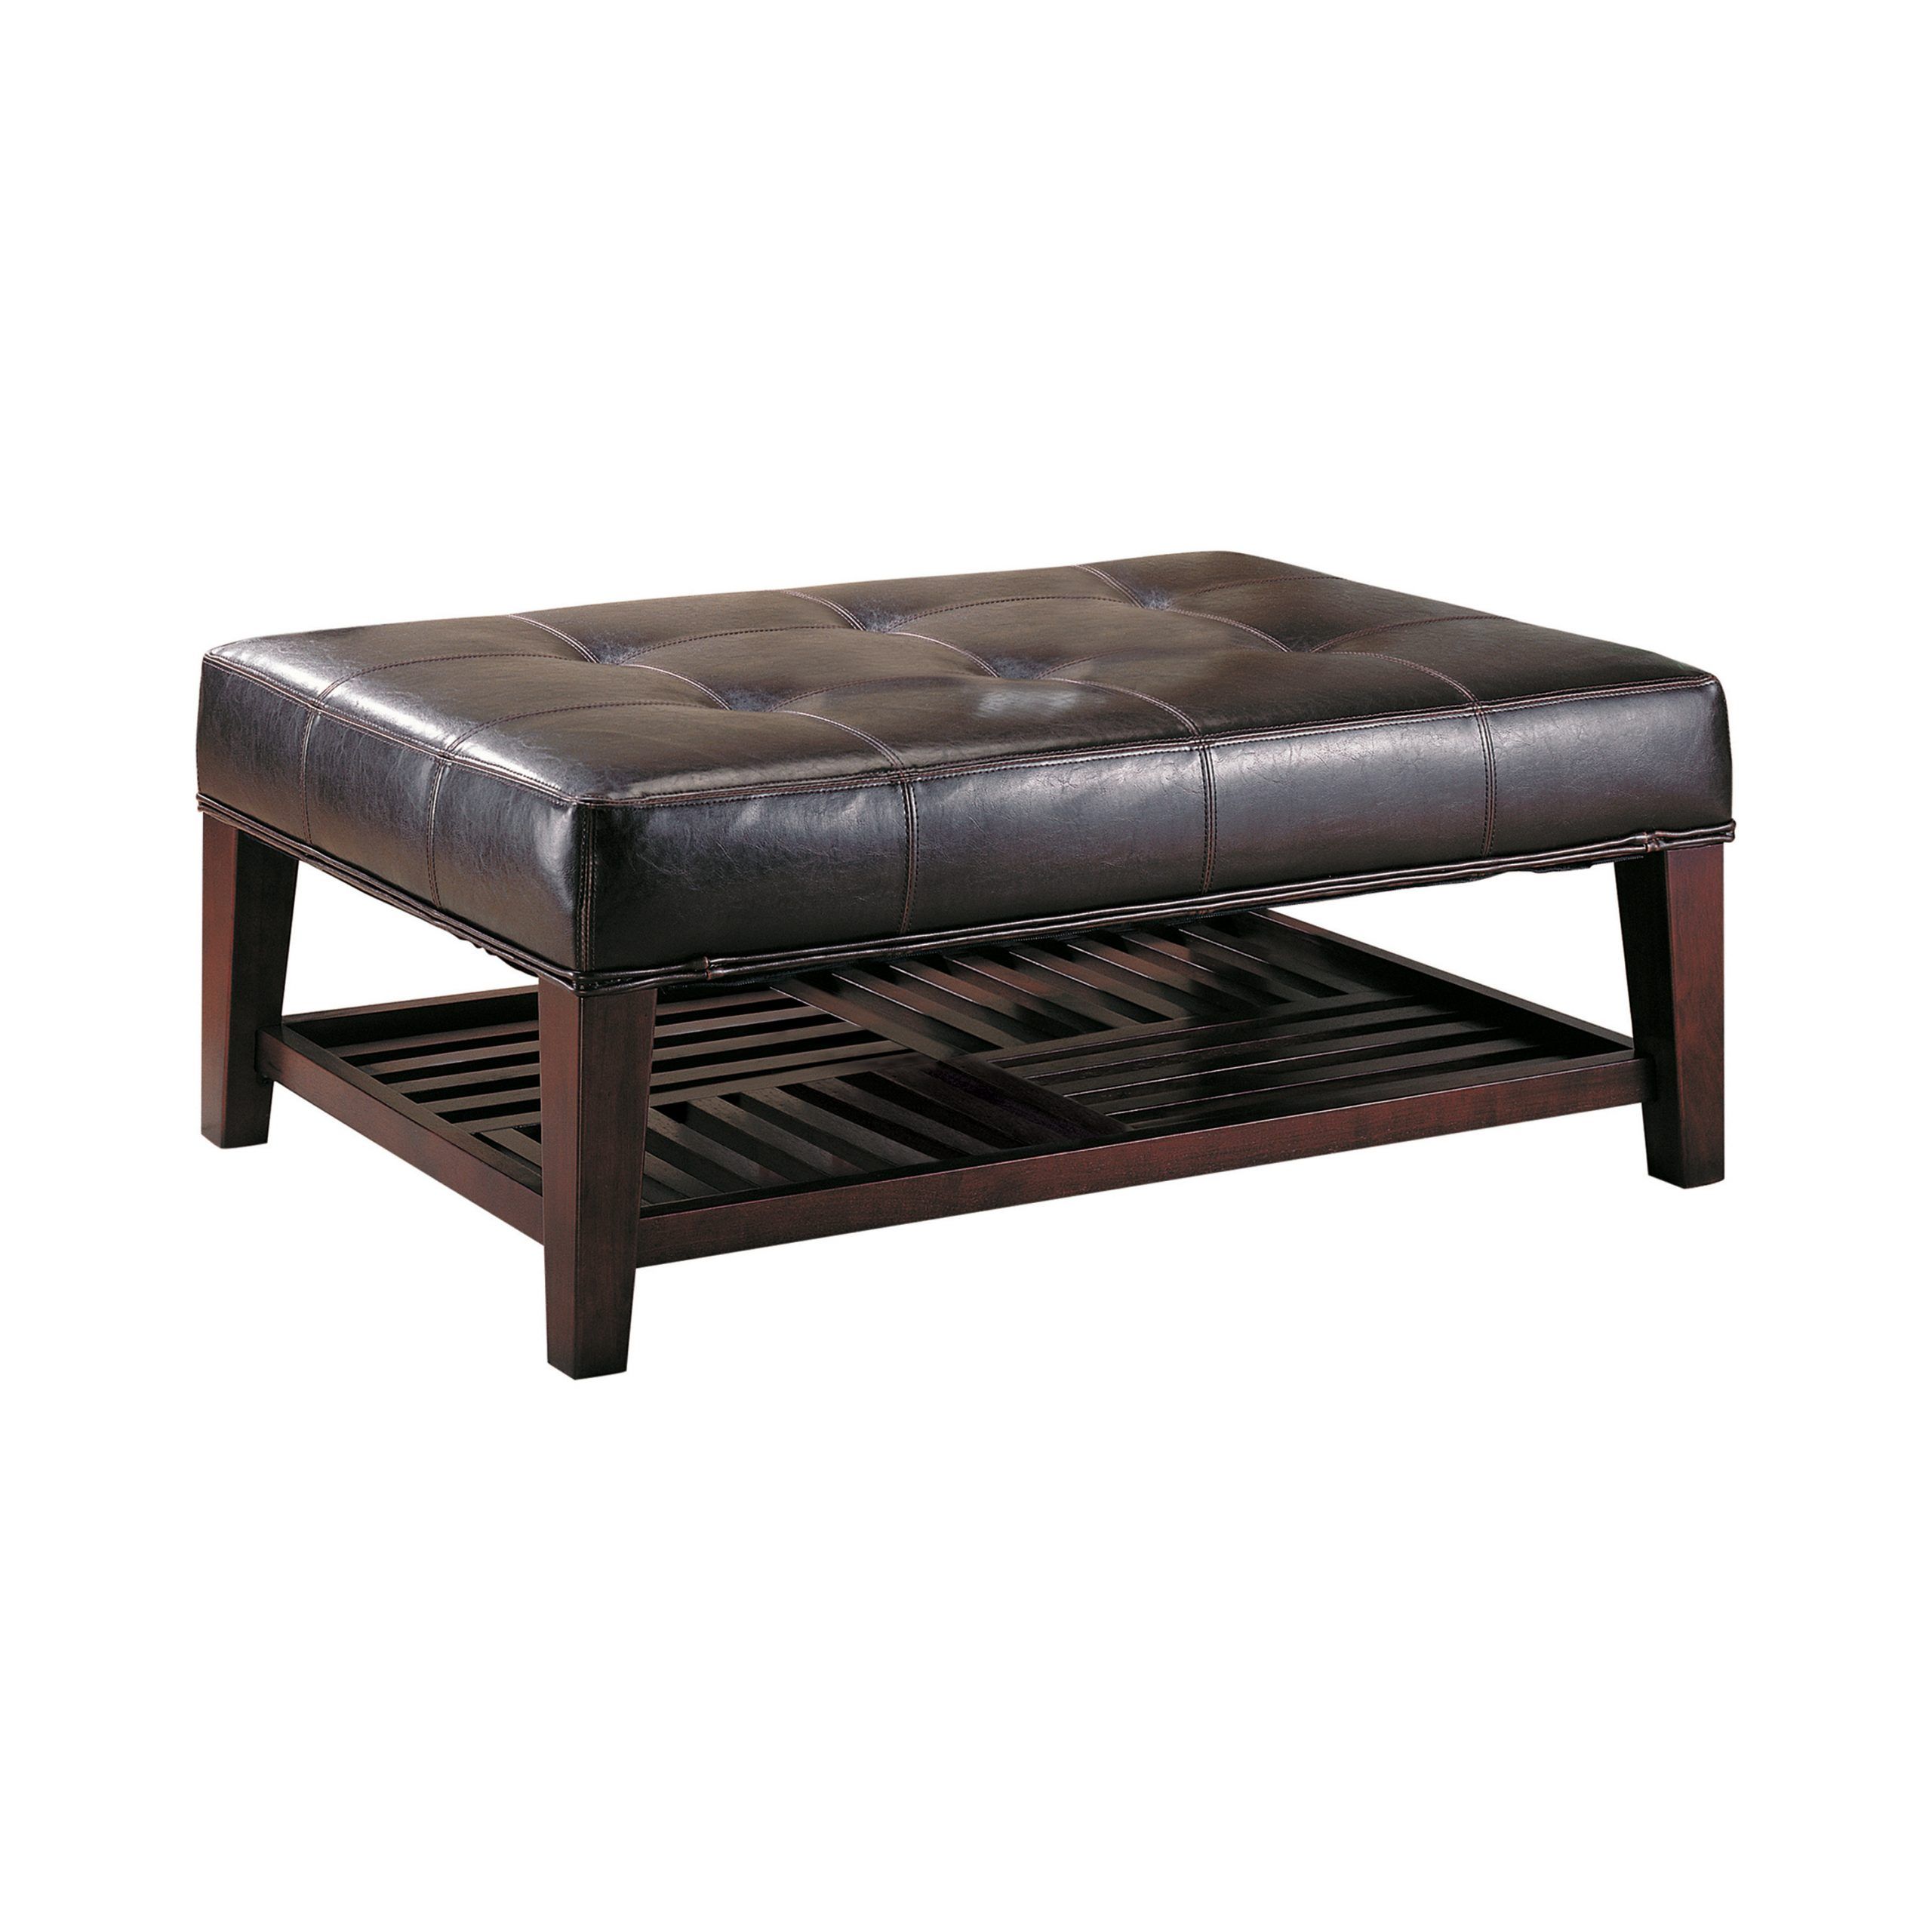 Tufted Ottoman With Storage Shelf Brown – Coaster Fine Furniture Inside Brown Tufted Pouf Ottomans (View 13 of 20)